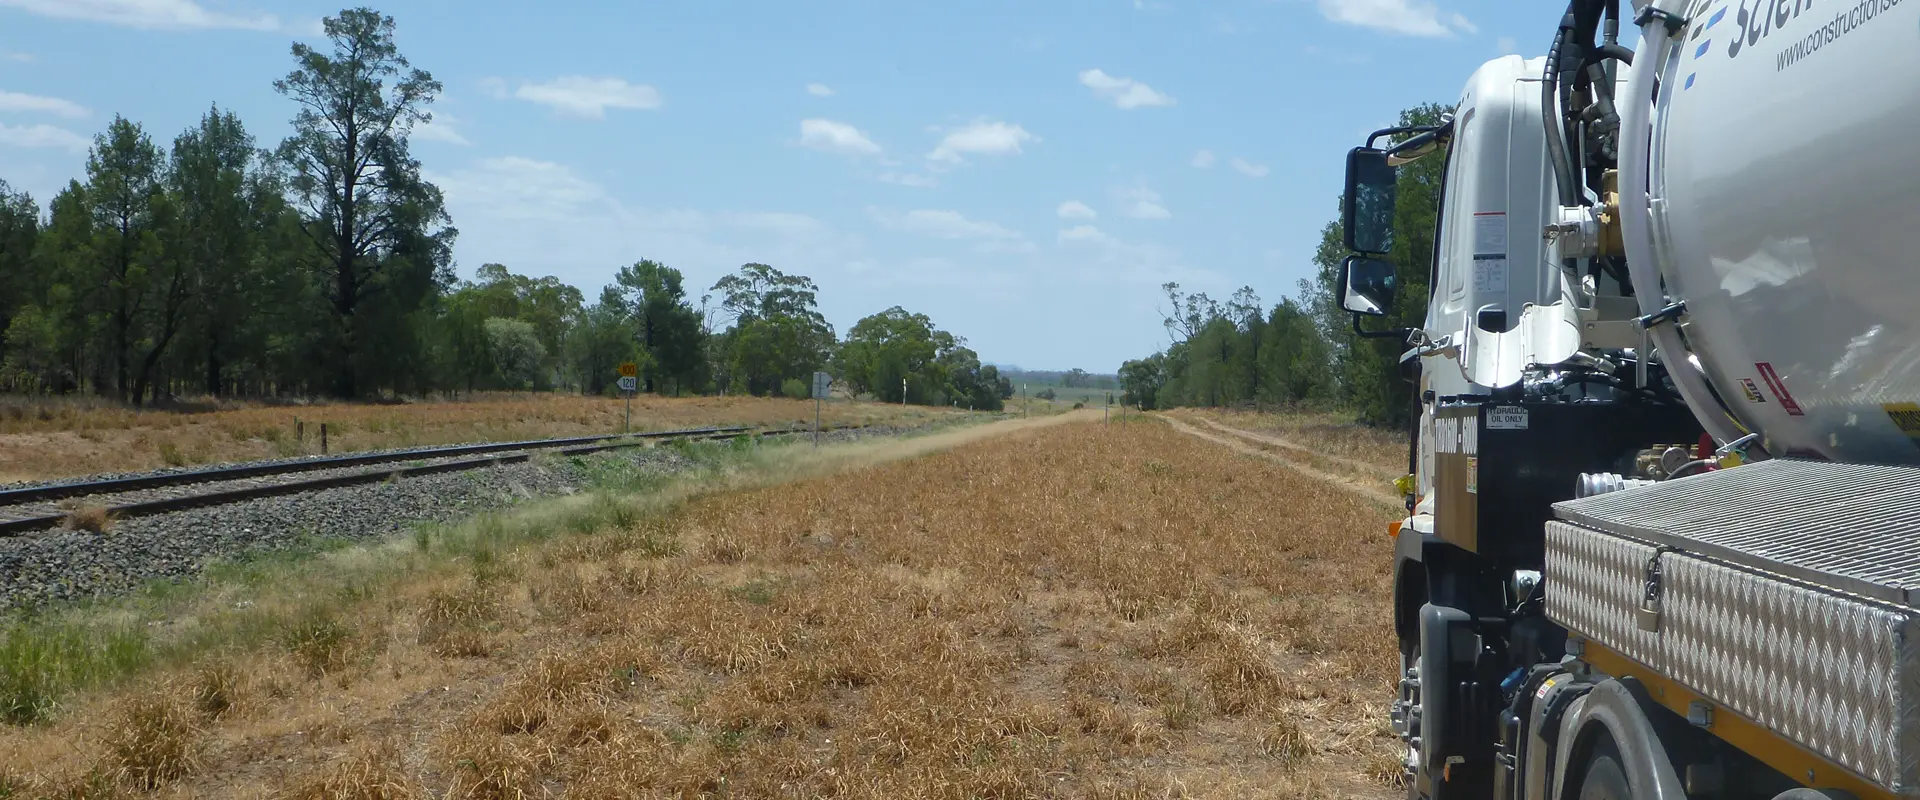 a construction sciences project inland rail